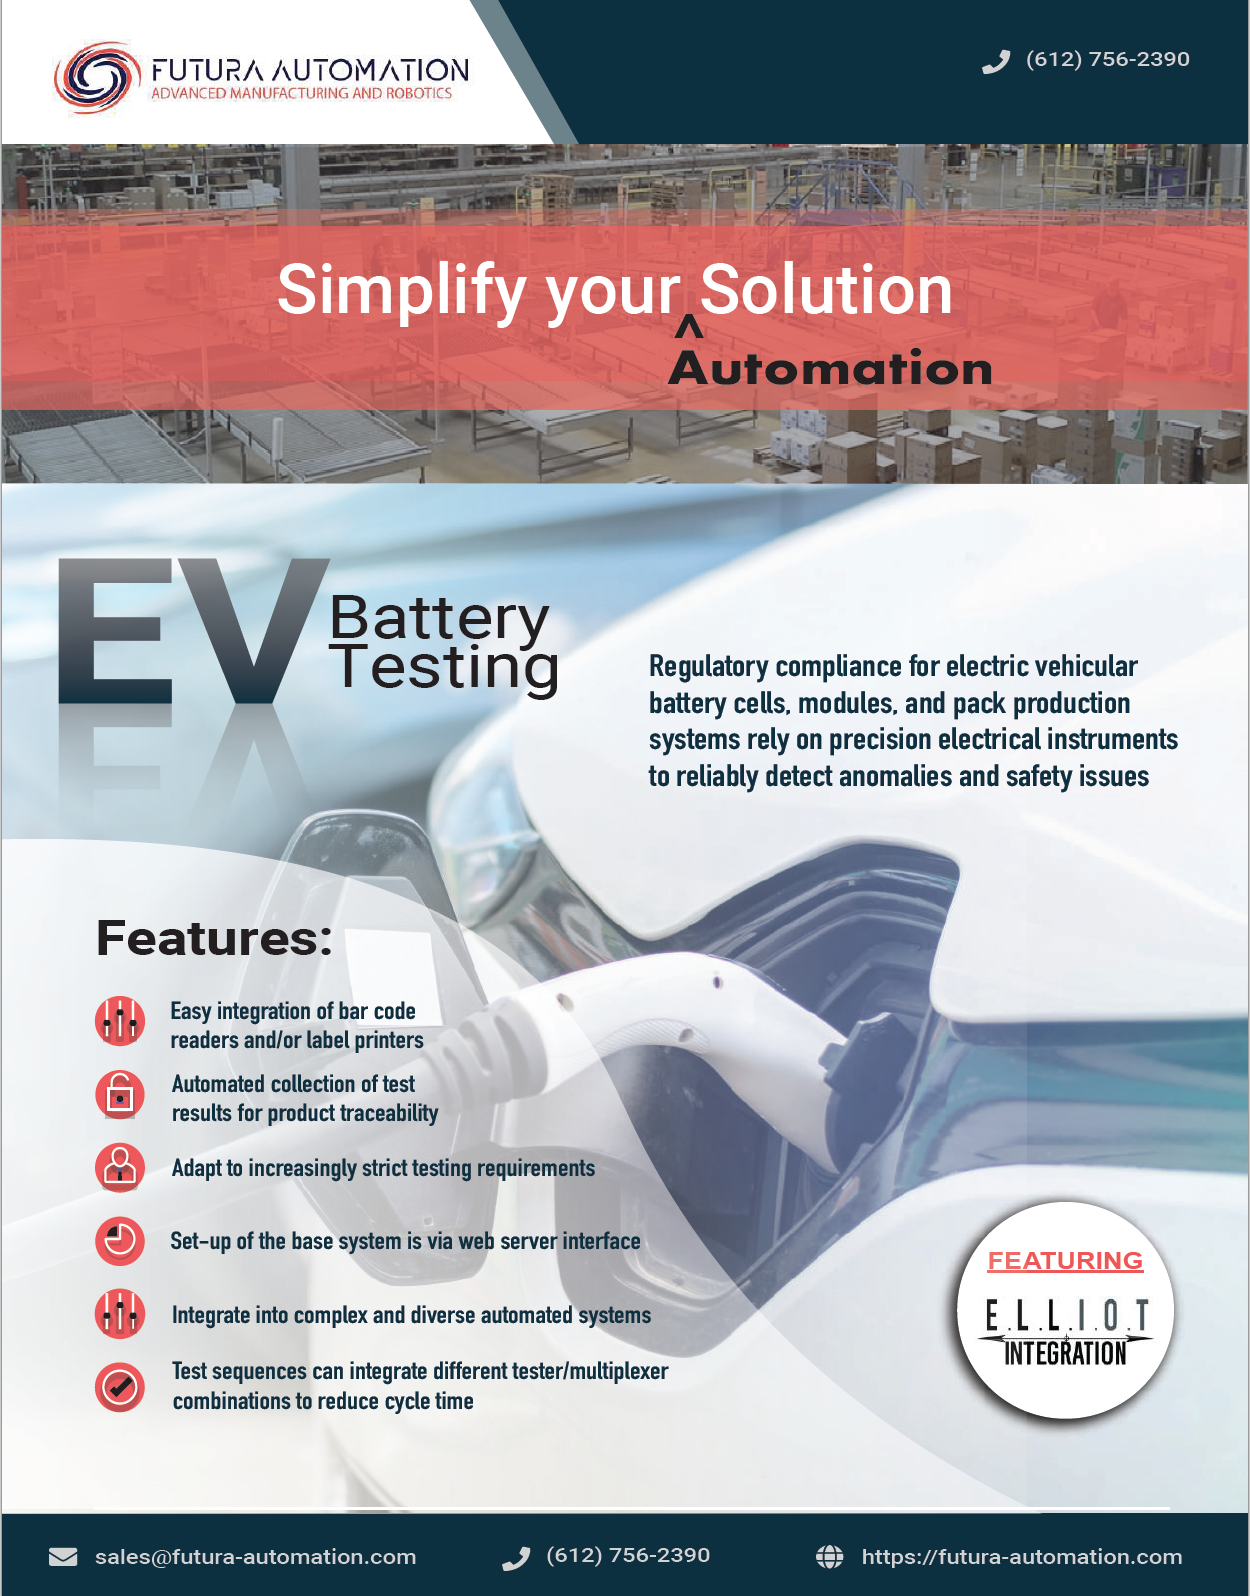 Futura Automation featuring Inline Electric Vehicle Battery Testing